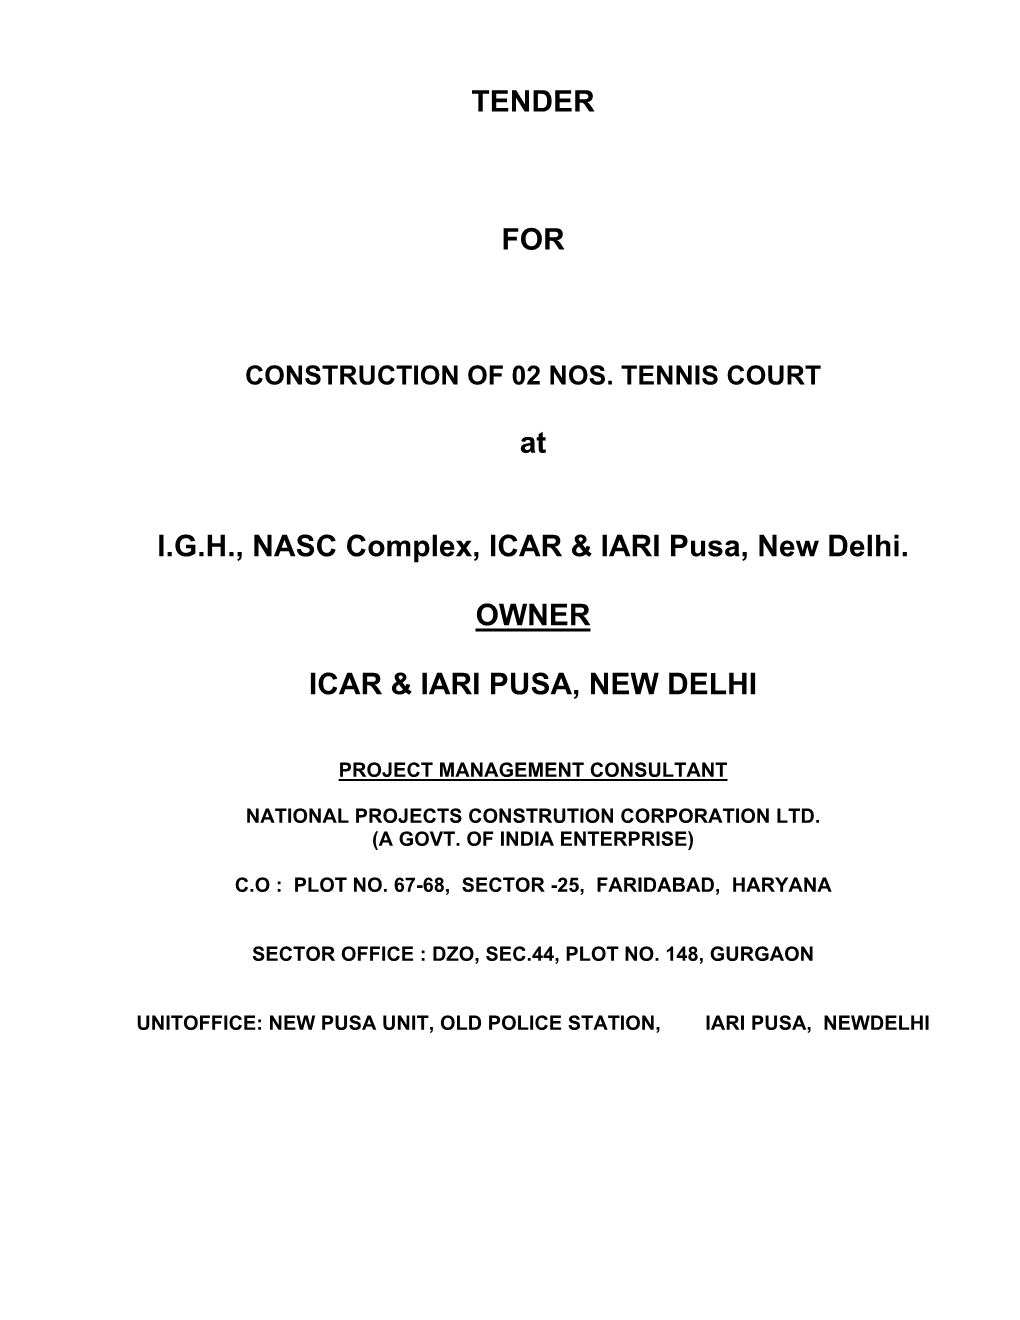 Tender for Construction of 2 Nos. Tennis Court at NASC Complex